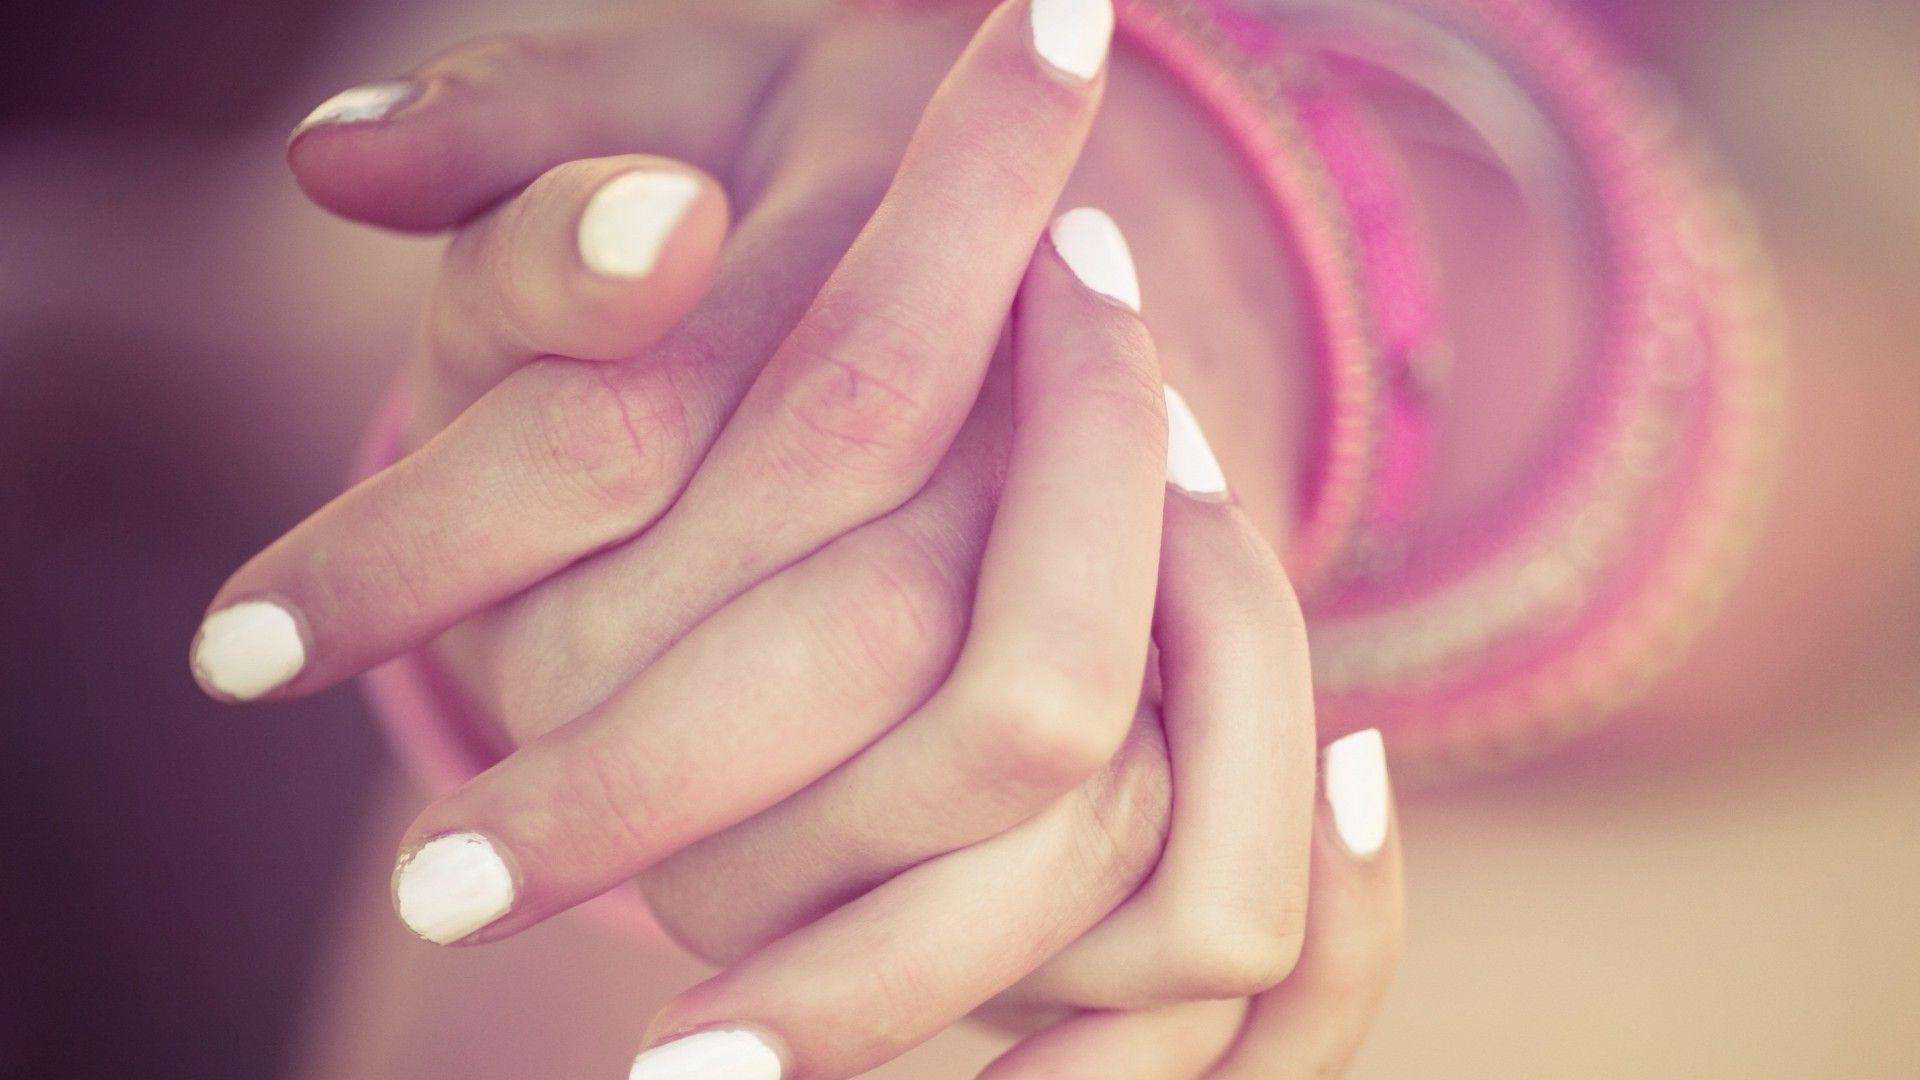 depth Of Field, Hand, Fingers, Painted Nails, Holding Hands